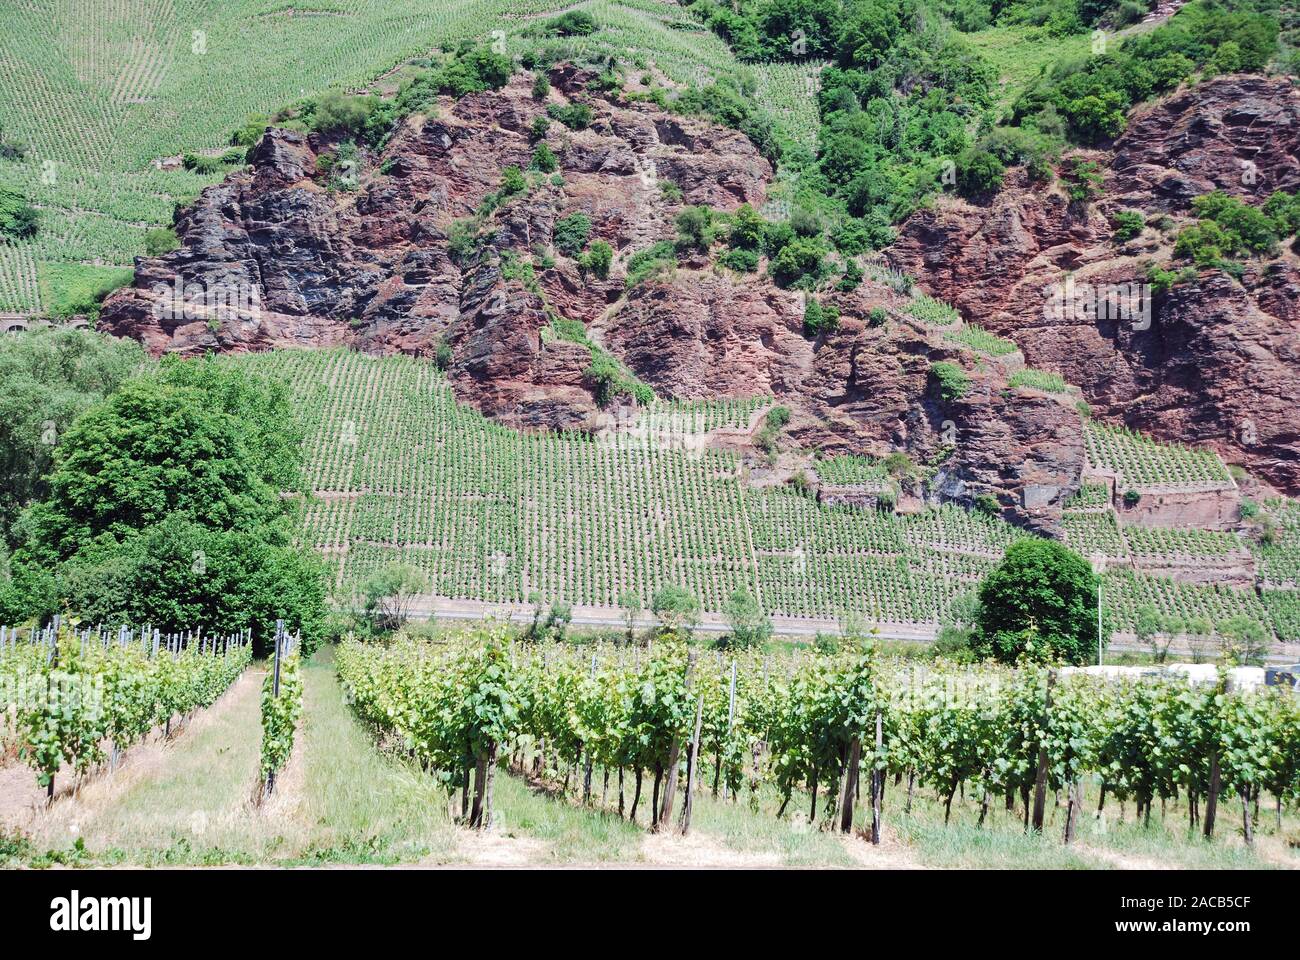 vineyard site and rocks in the German wine-growing region Mosel, valley of the Mosel, Rhineland-Palatinate, Germany, Europe Stock Photo